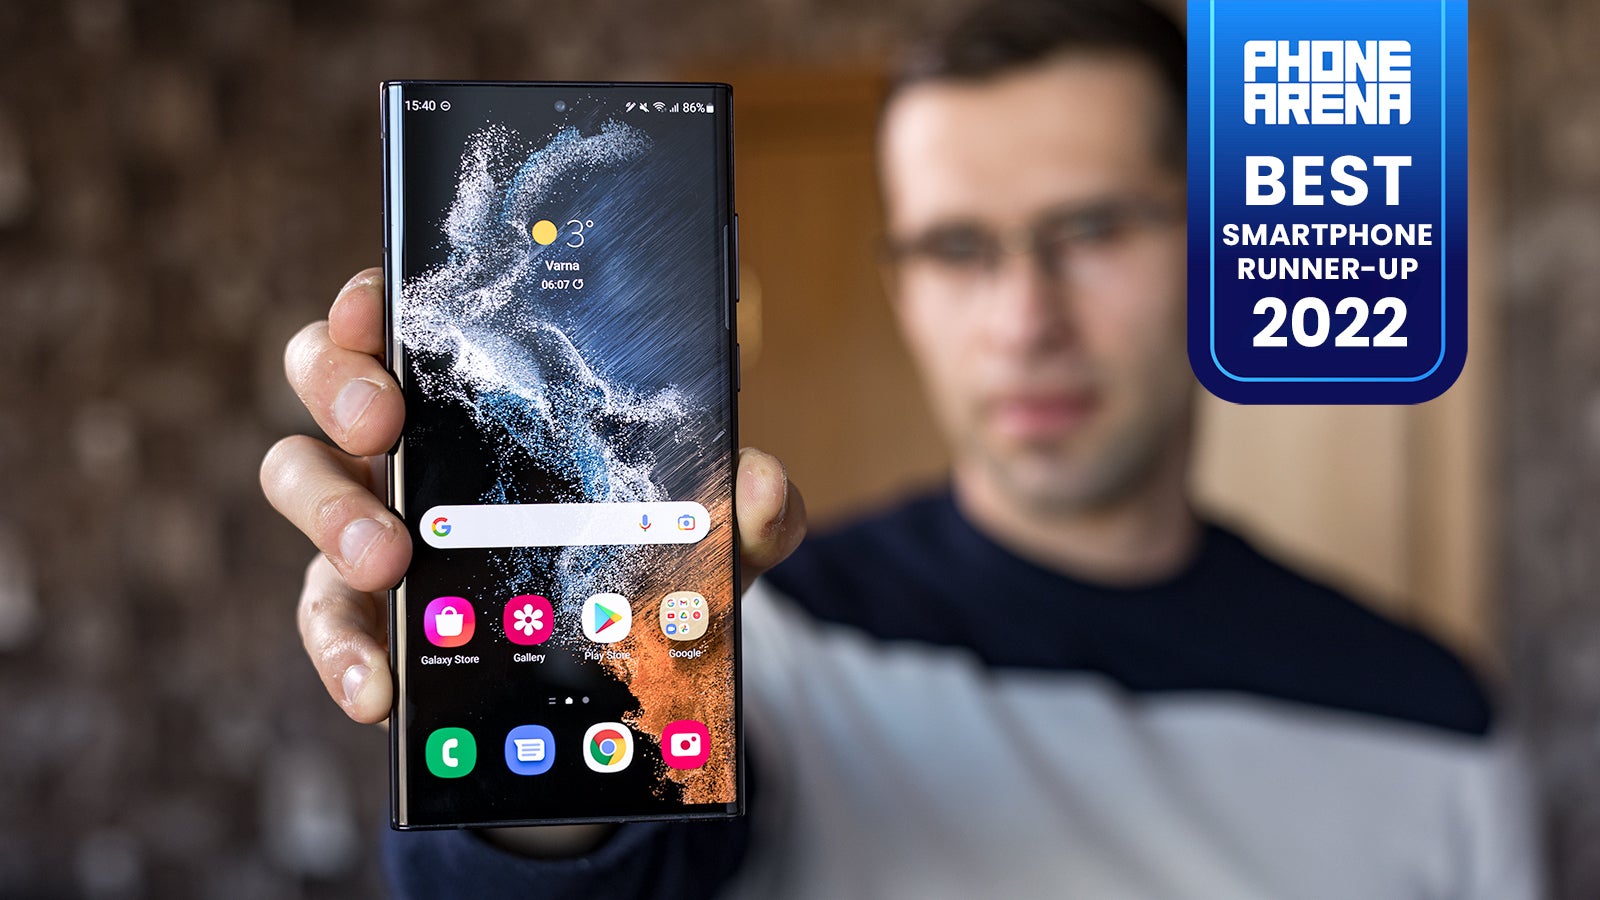 (Image Credit - PhoneArena) Galaxy S22 Ultra is the runner-up for best smartphone of 2022 - PhoneArena Awards 2022: Best Phones of the Year!